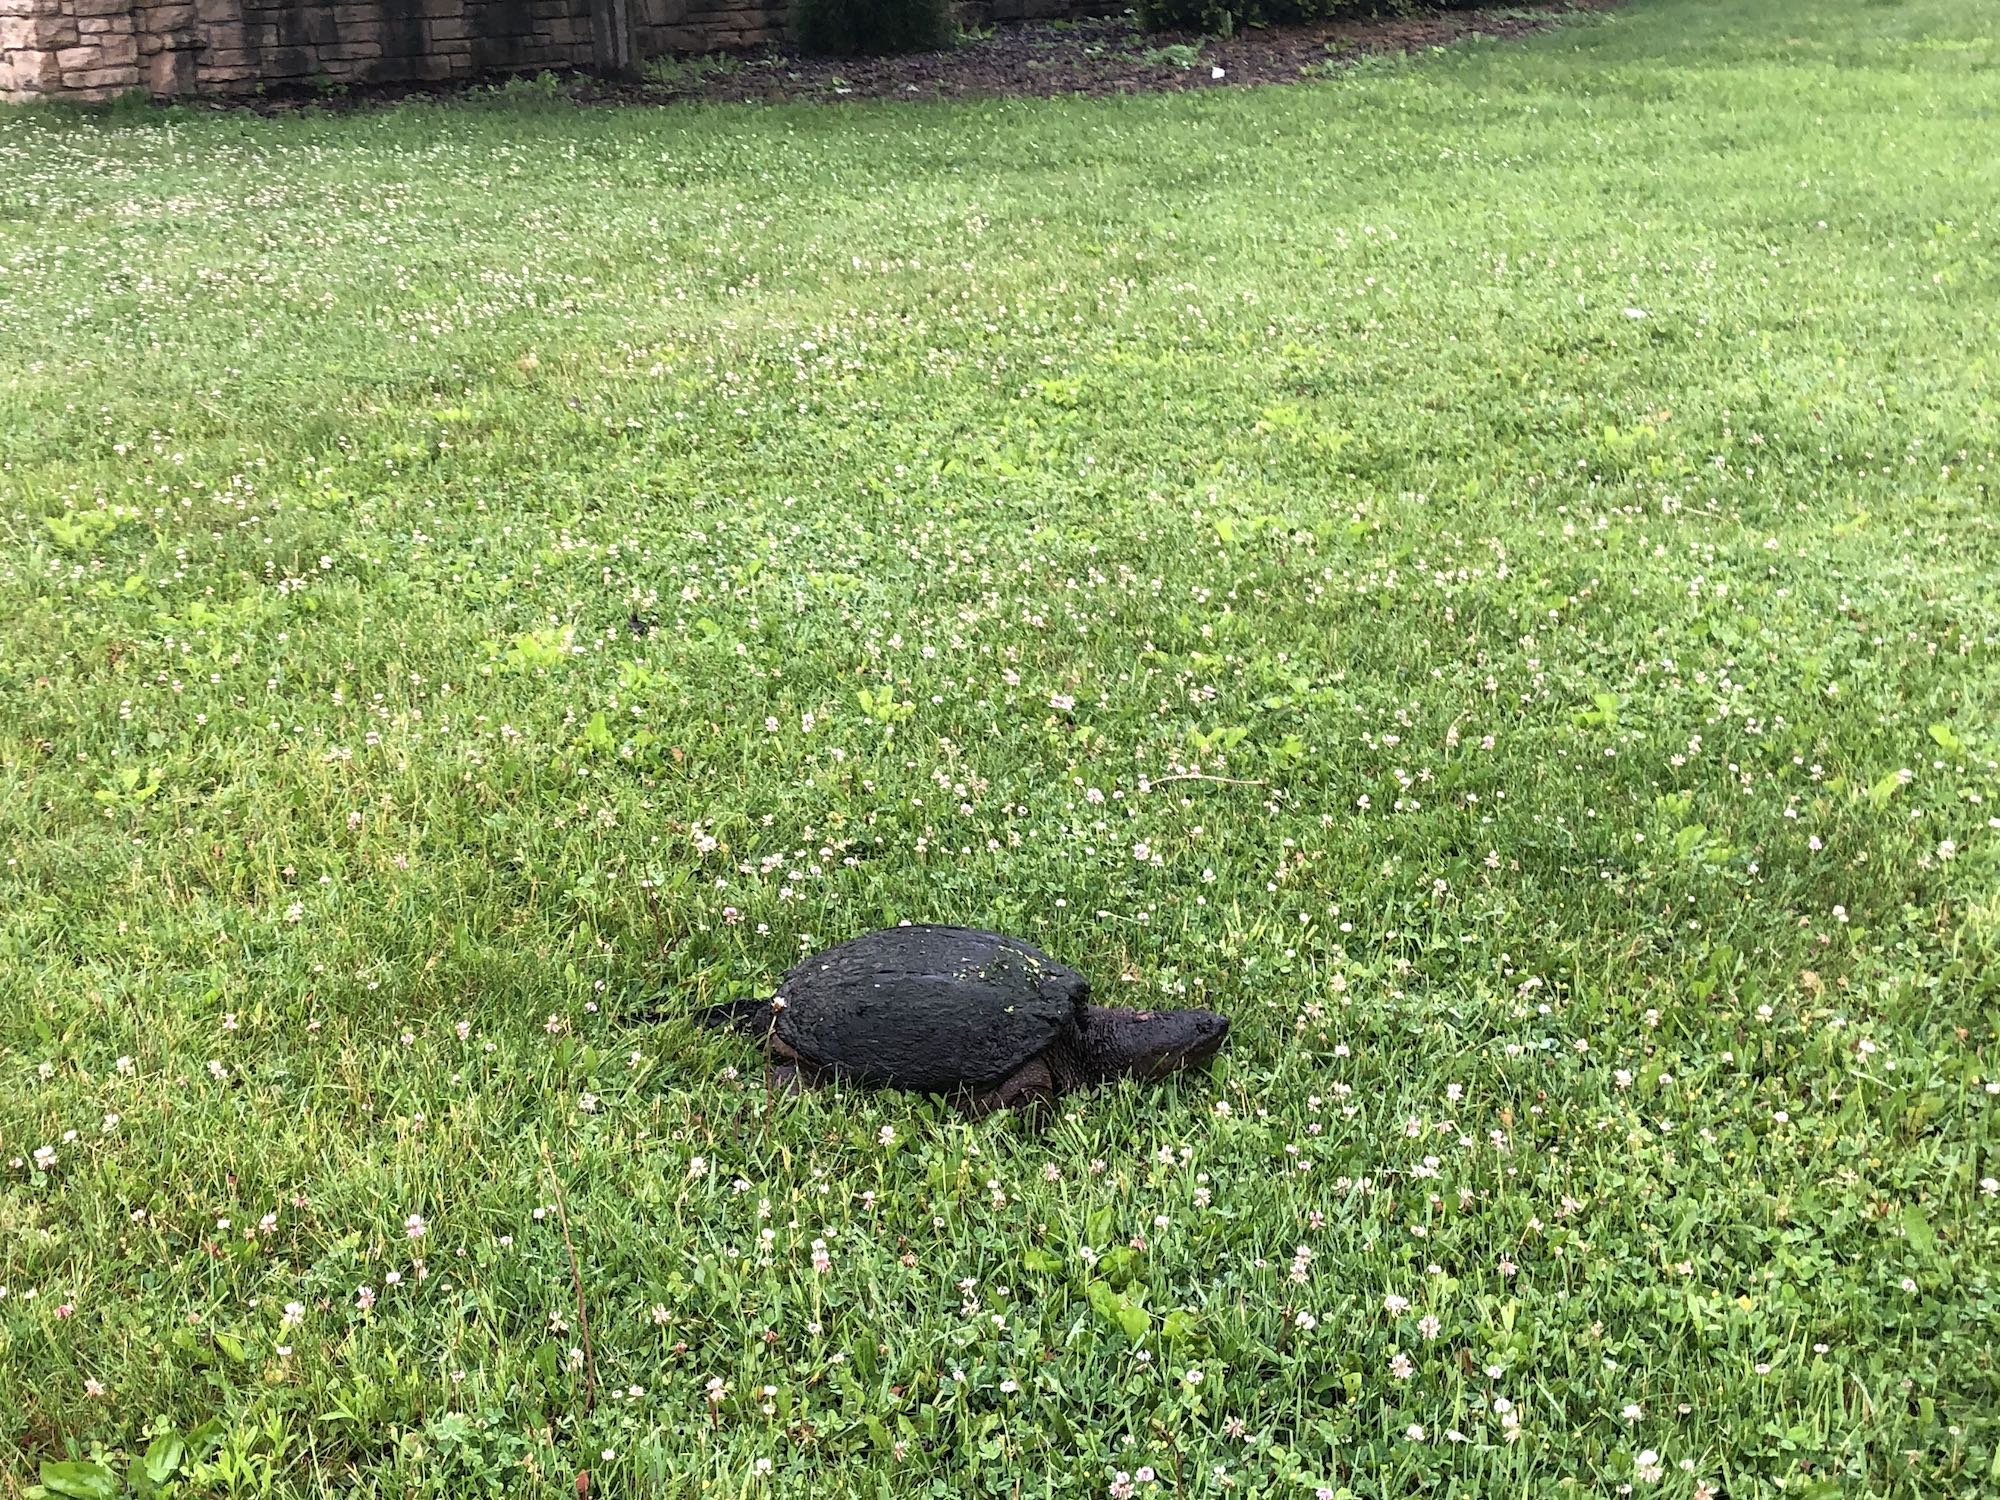 Snapping Turtle in E. Ray Stevens Pond and Aquatic Gardens on corner of Manitou Way and Nakoma Road in Madison, Wisconsin on June 16, 2019.